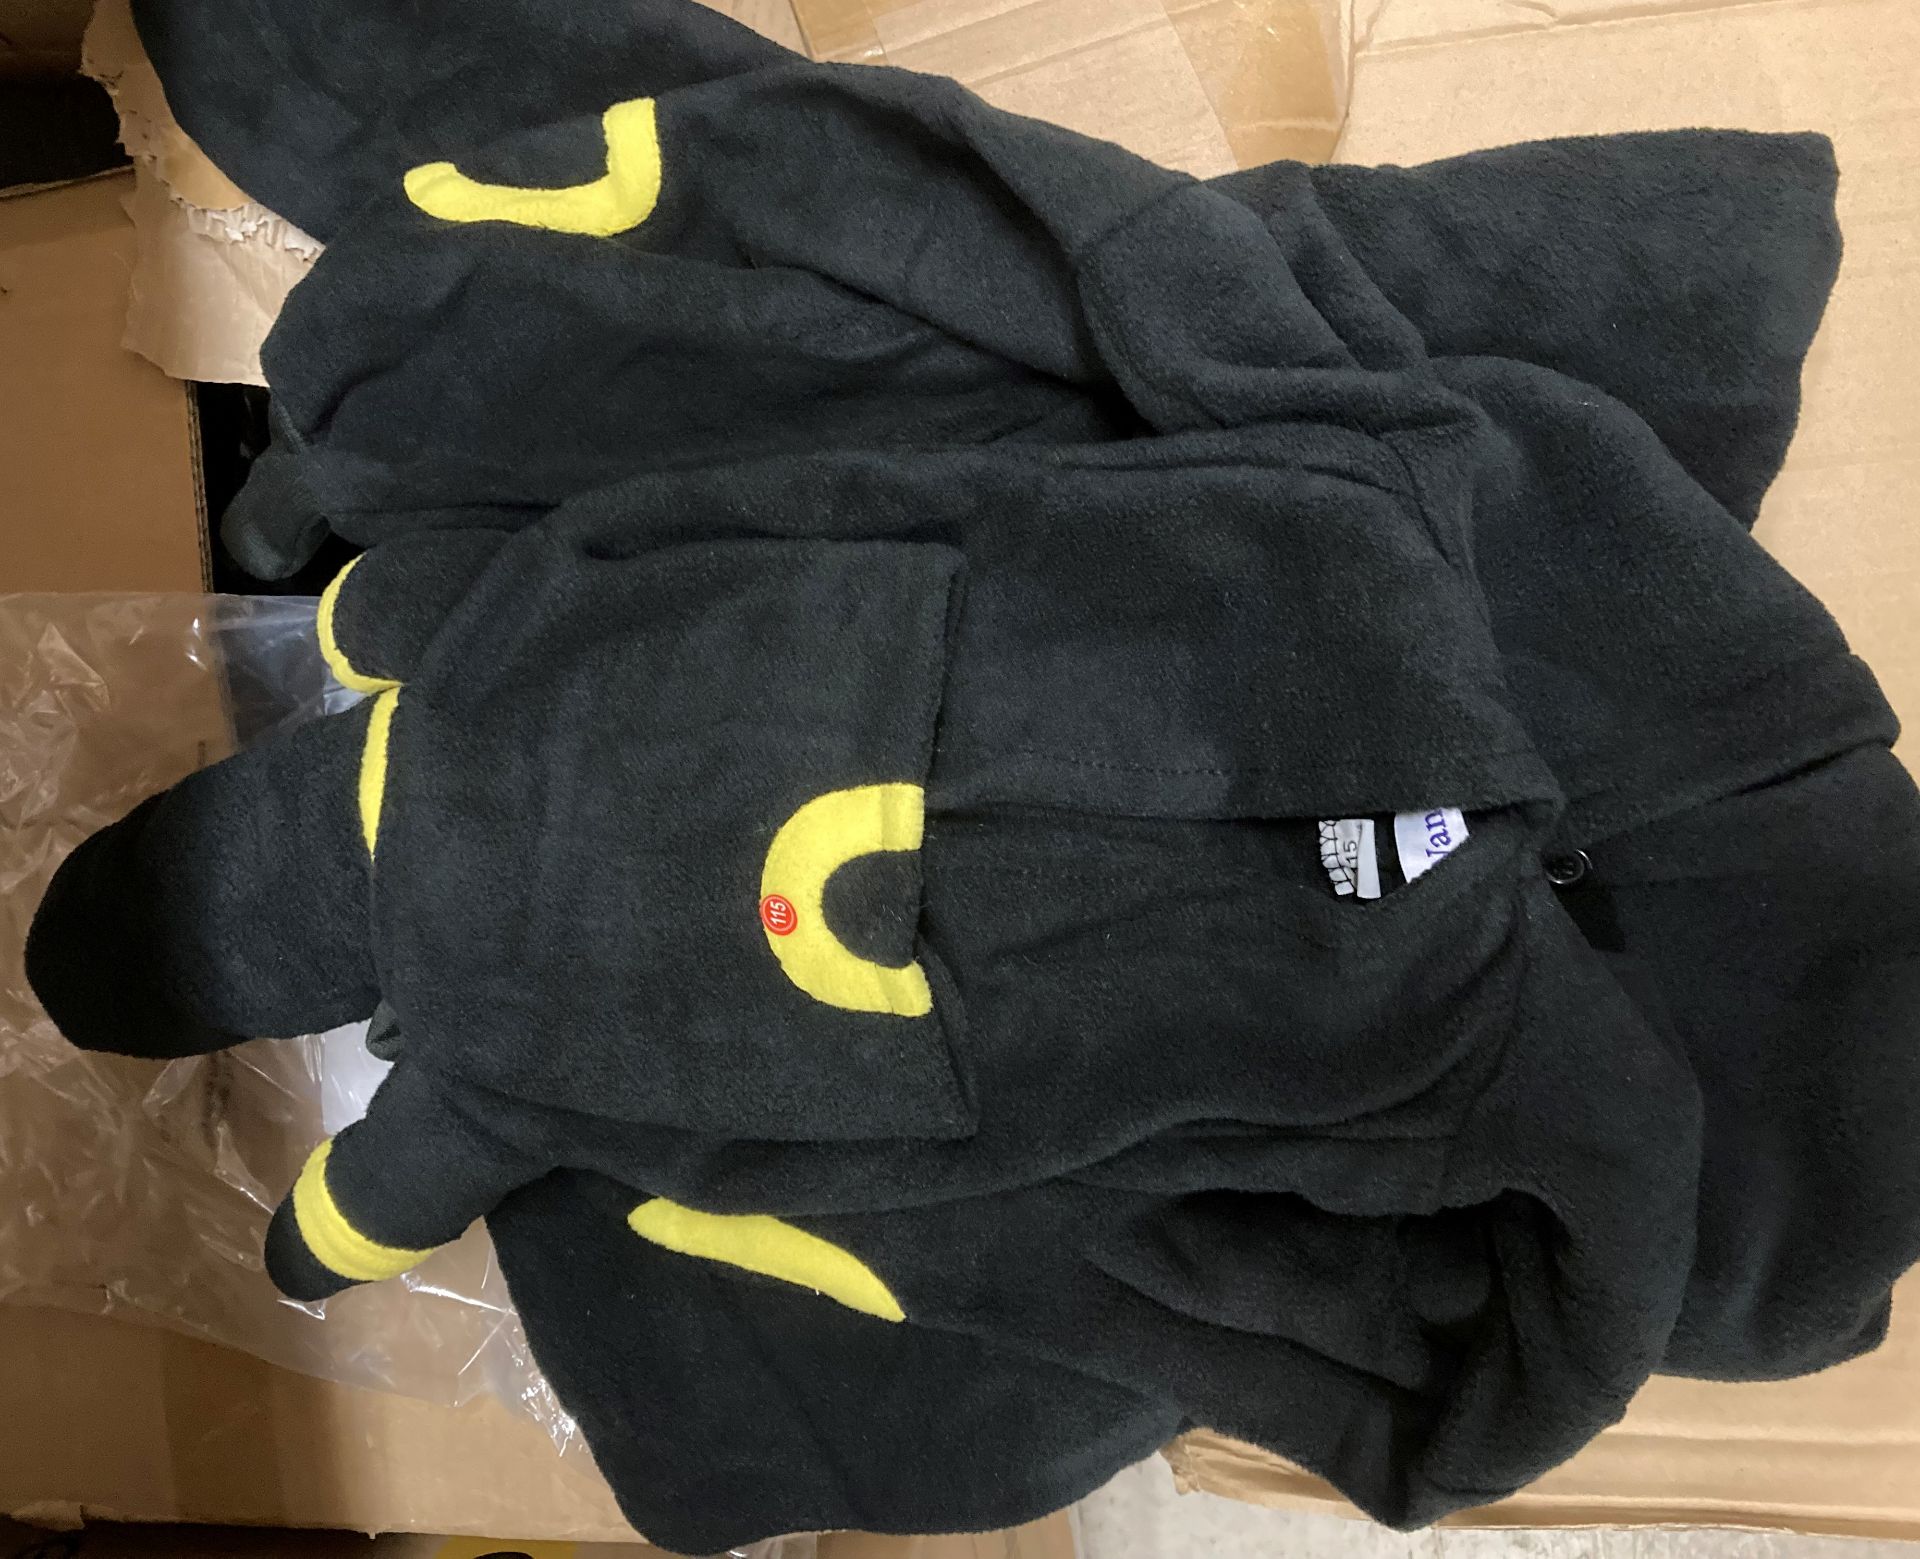 18 x Umbreon (Pokémon) Wanziee onesies in assorted kids sizes mainly 8-10 years (1 x outer box)